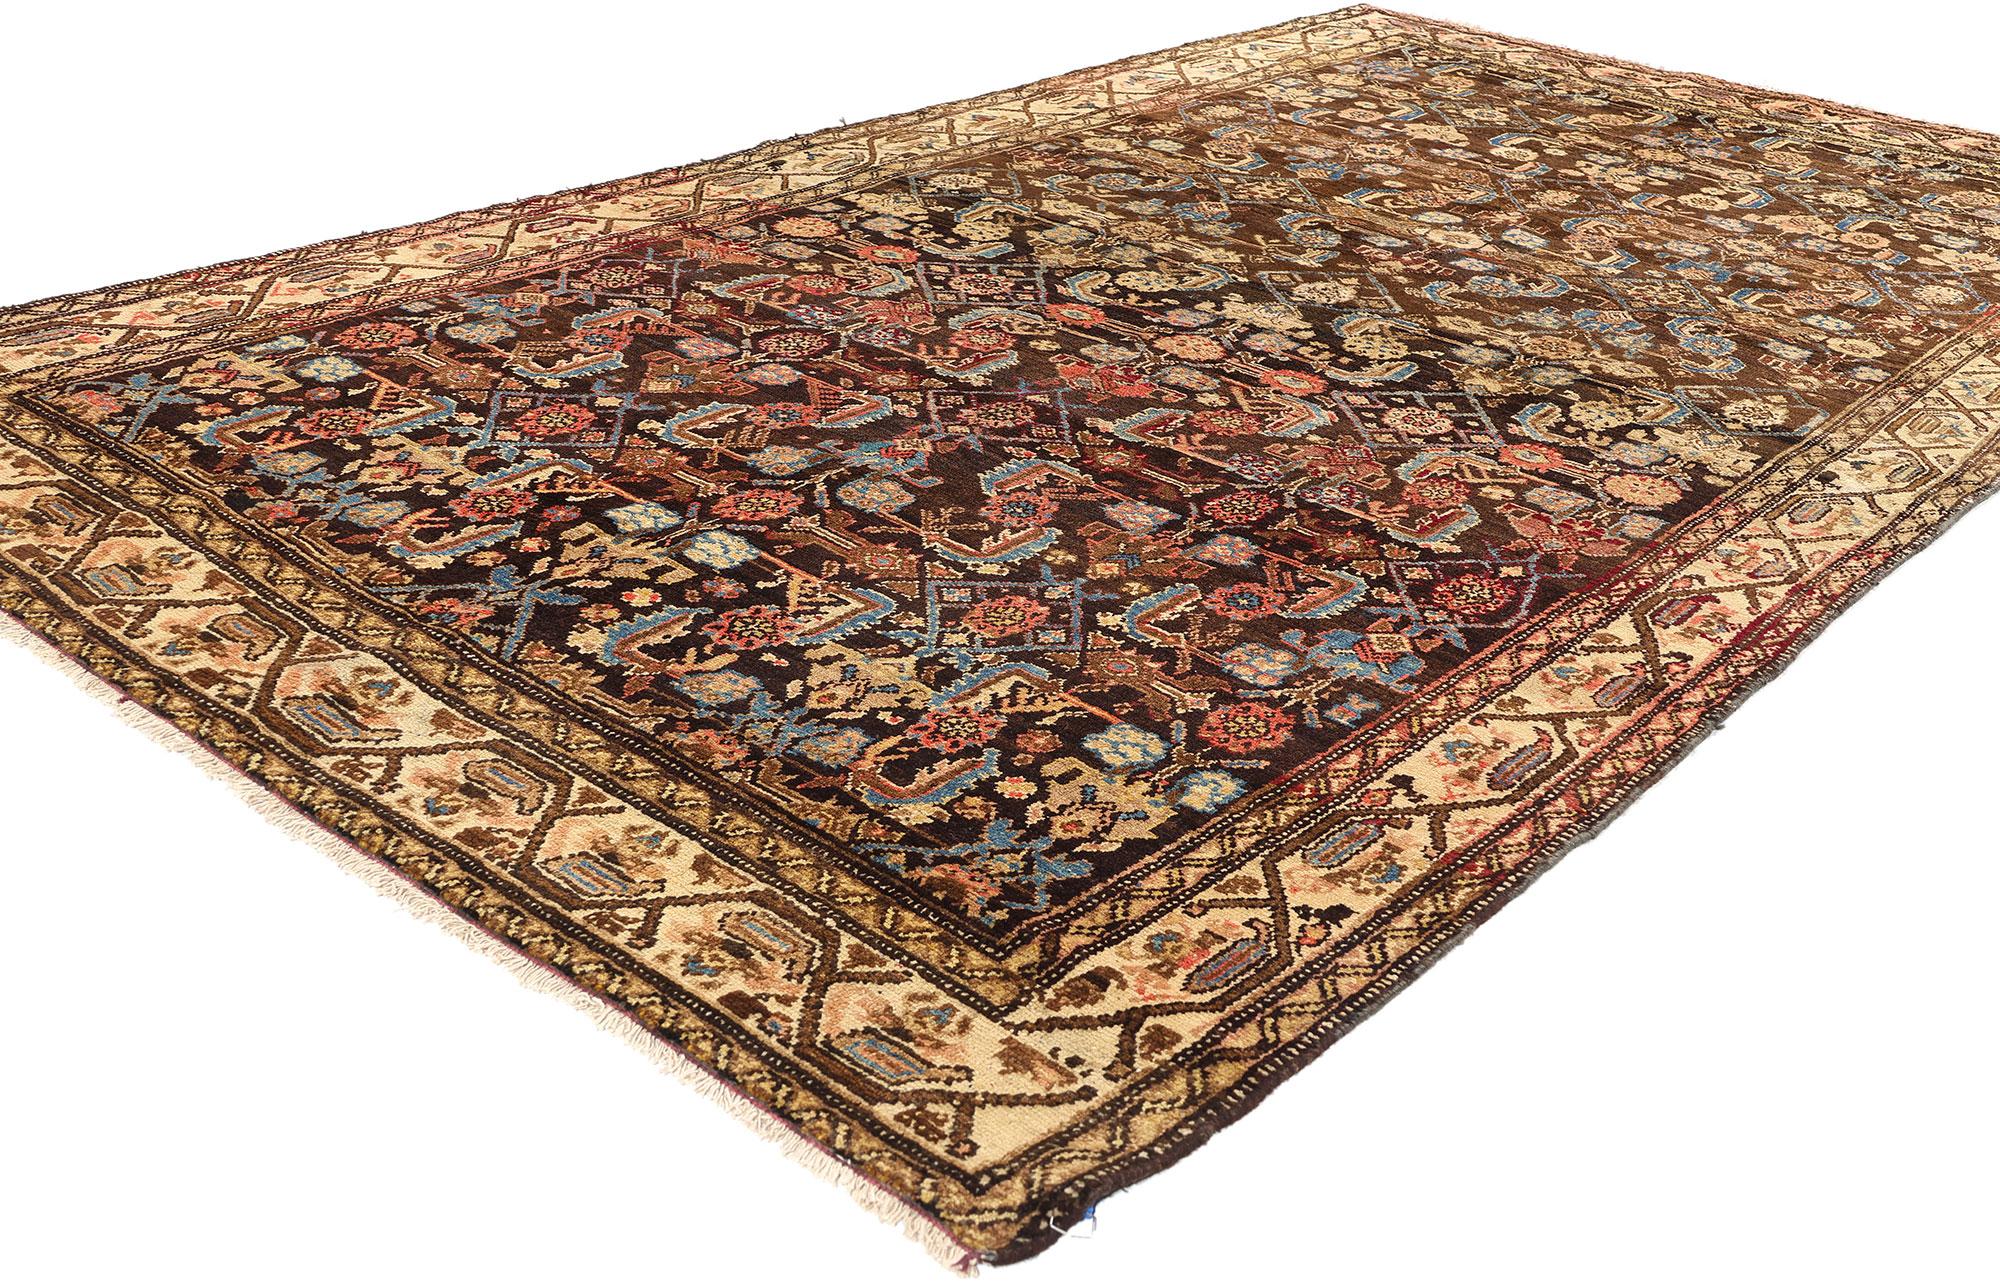 53761 Antique Brown Persian Malayer Rug, 05'01 x 09'02. Antique-washed Persian Malayer rugs have undergone a special washing process to soften colors with earth-tone colors such as warm browns, muted greens, soft blues, and creamy beiges, giving